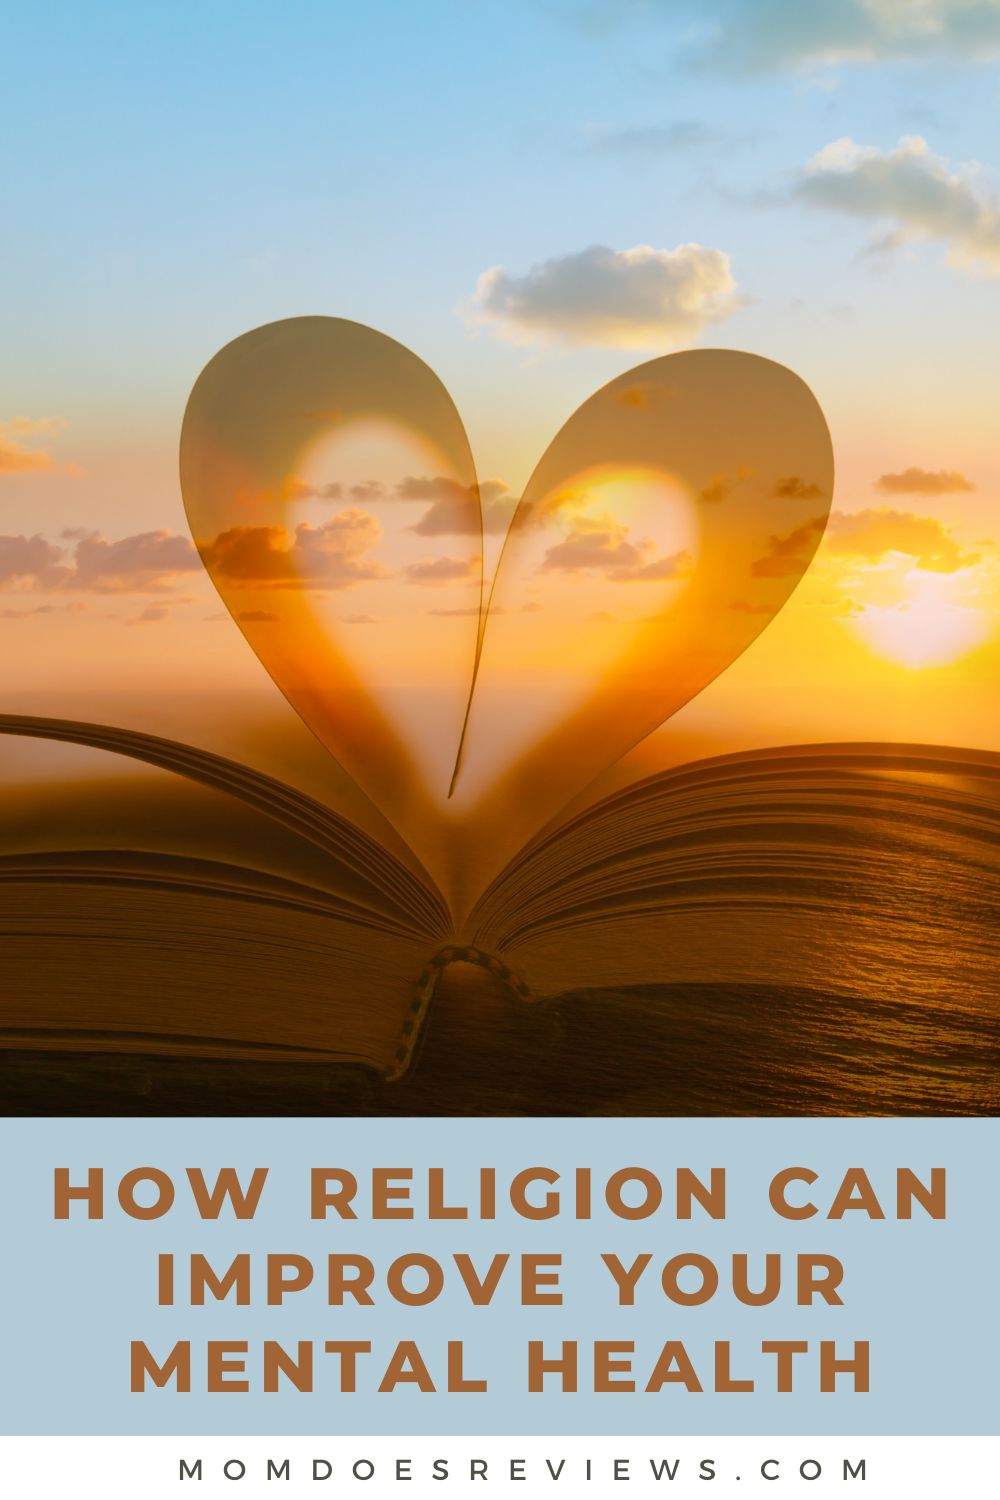 What Are the Benefits of Being Religious?